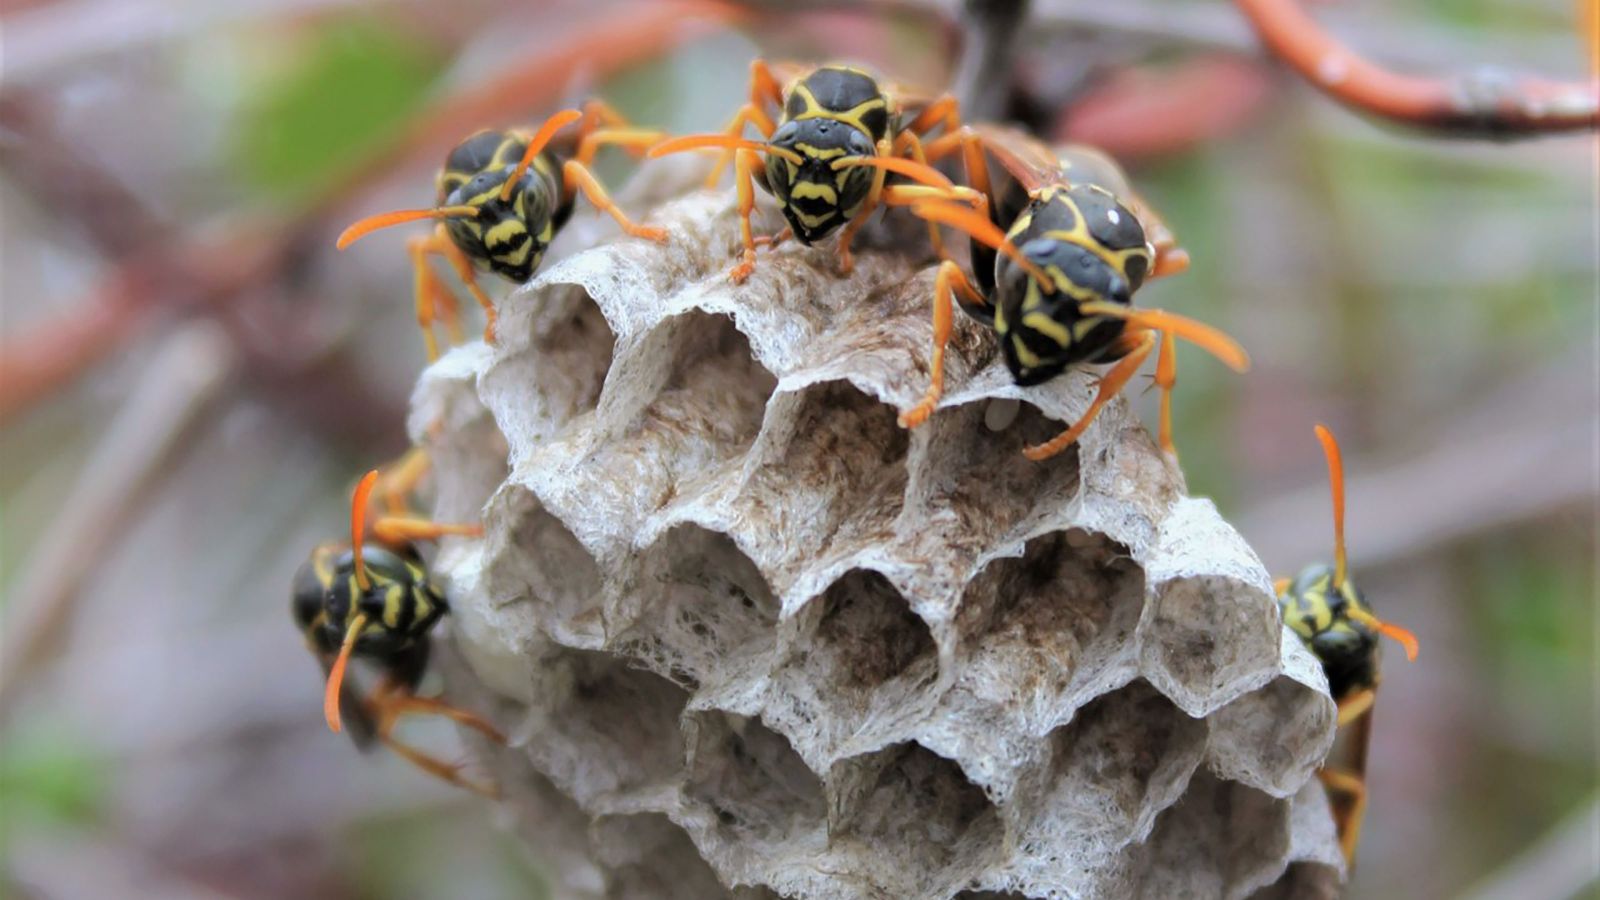 A nest of wasps